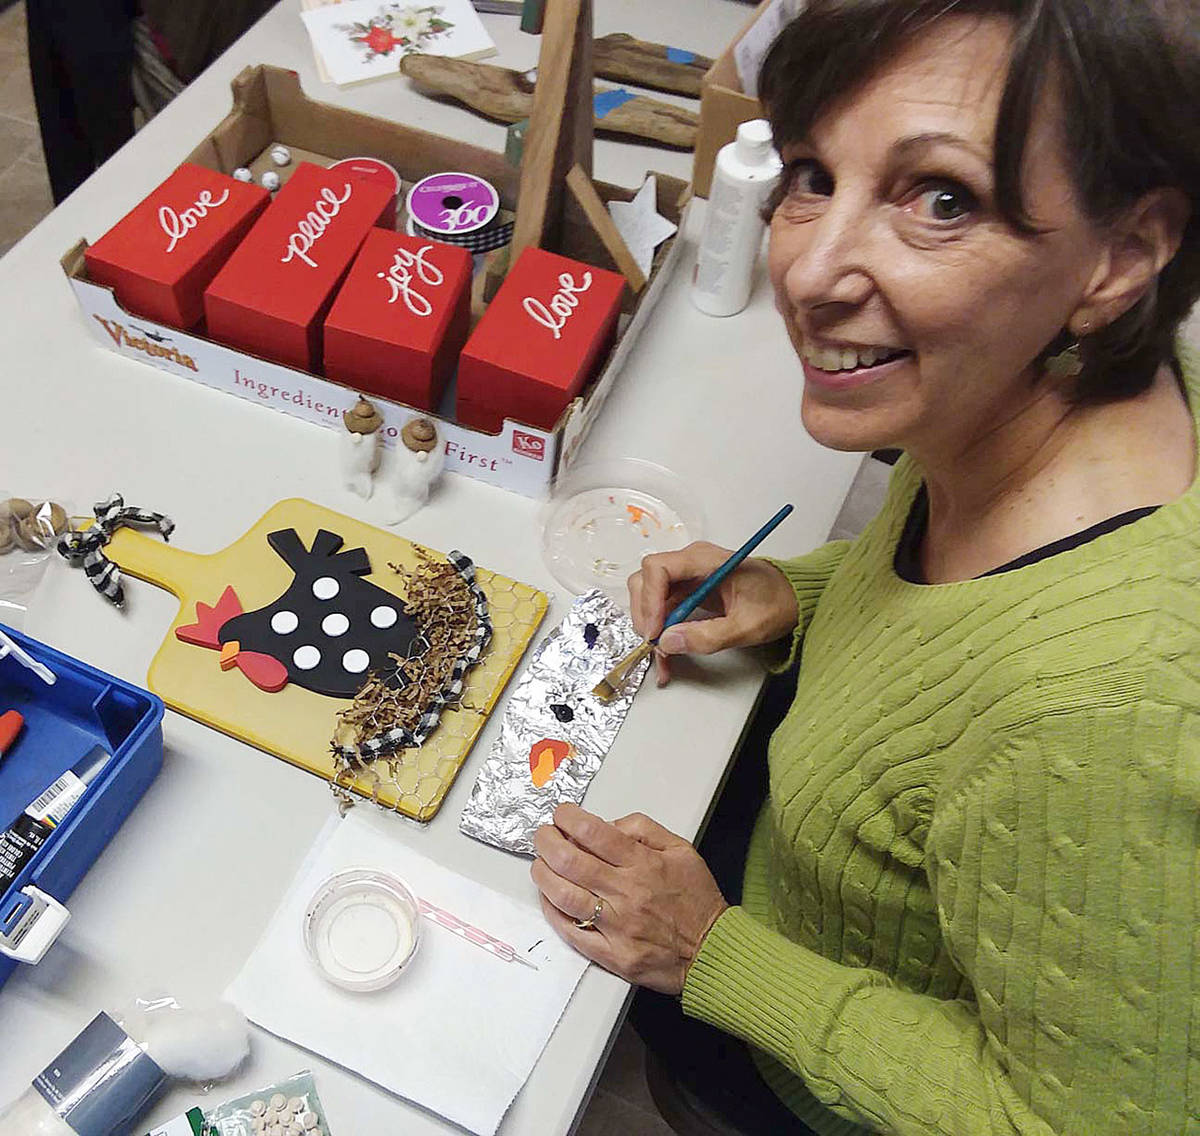 Former Sequim artist Karin Anderson, now a Santa Fe resident, helps contributors to the Dungeness Valley Luther Church Yuletide Bazaar at a recent “work session” to craft items for the annual event.